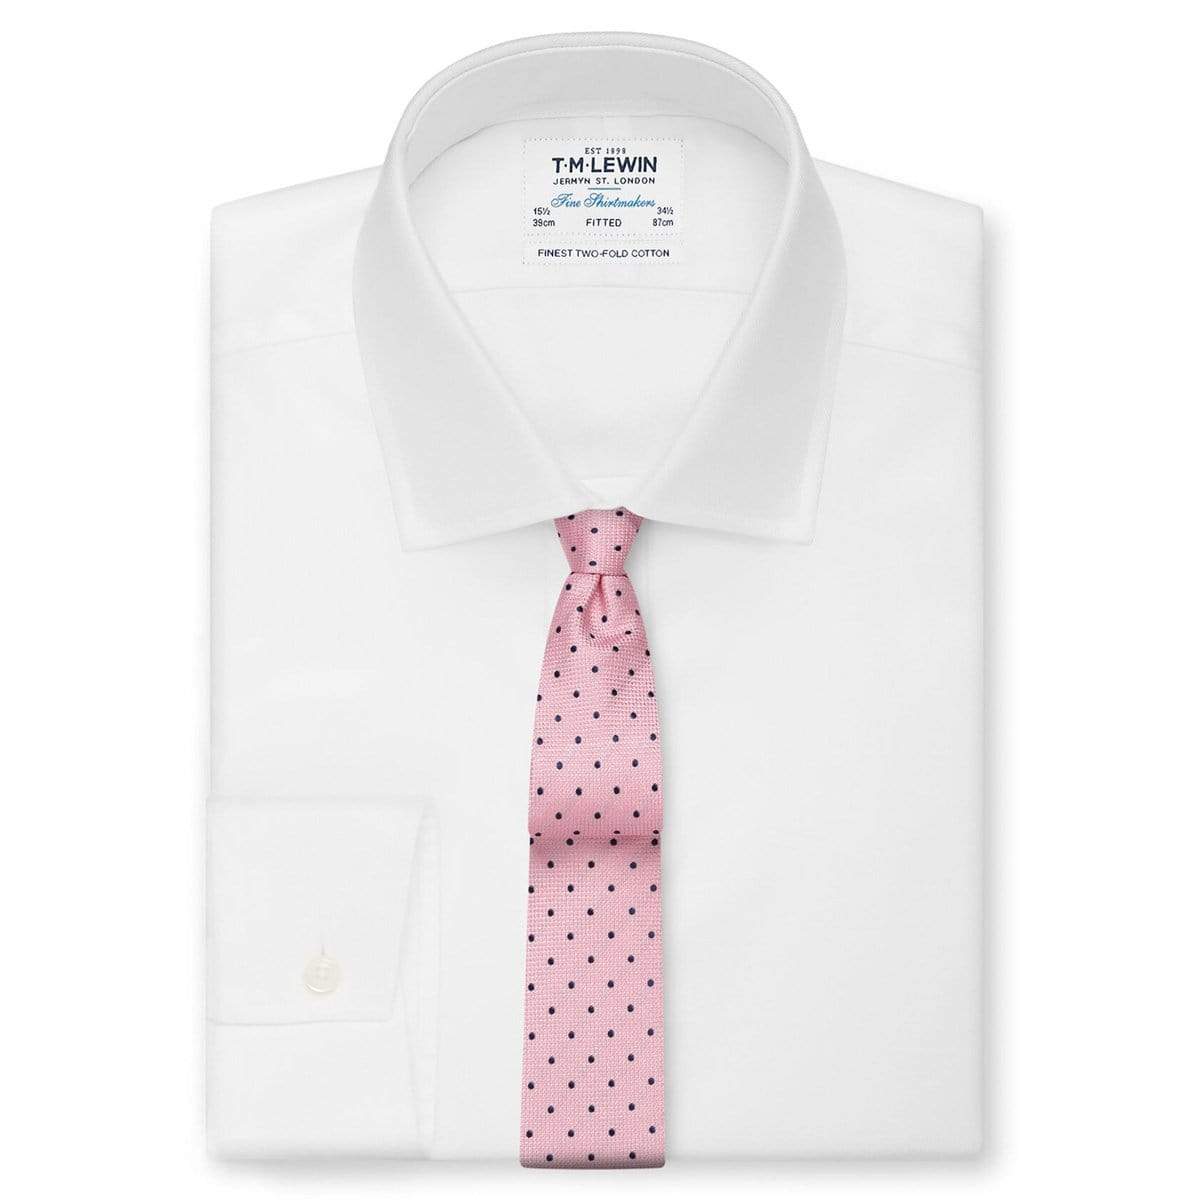 T.M.Lewin-Textured-Spot-Tie-Pink-and-Navy-70522-003